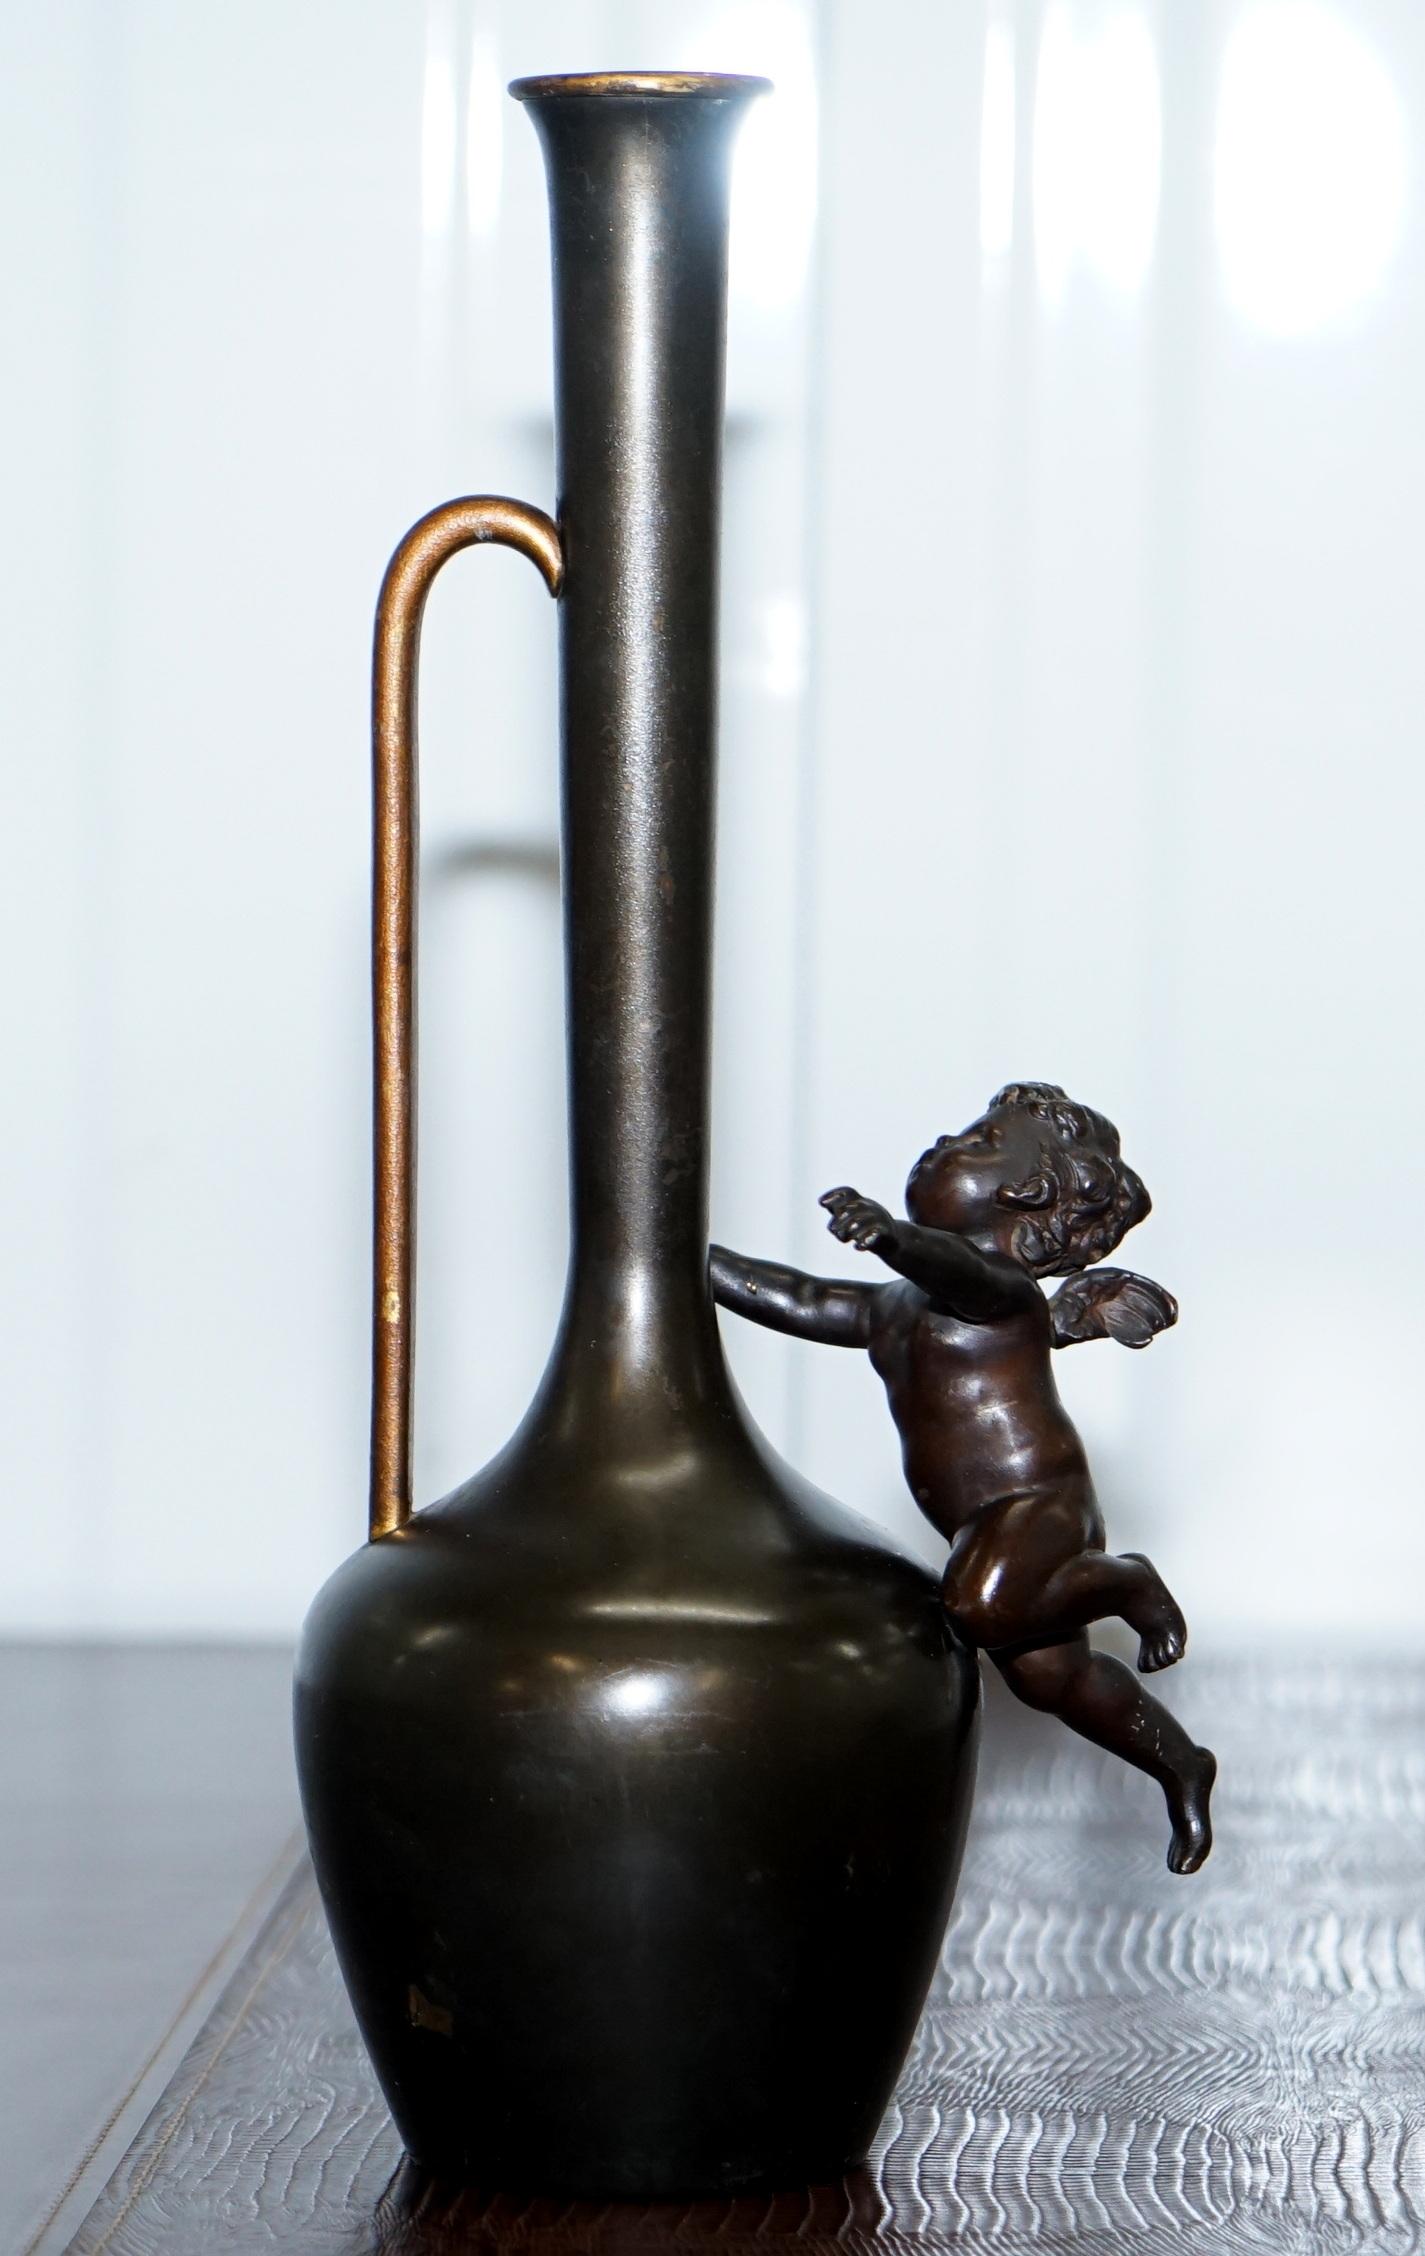 We are delighted to offer for sale this lovely original pair of 1930s bronze jug vases with cherubs

A good looking and well made pair, the Cherubs have two different positions which is much nicer than if they were holding the same pose

These